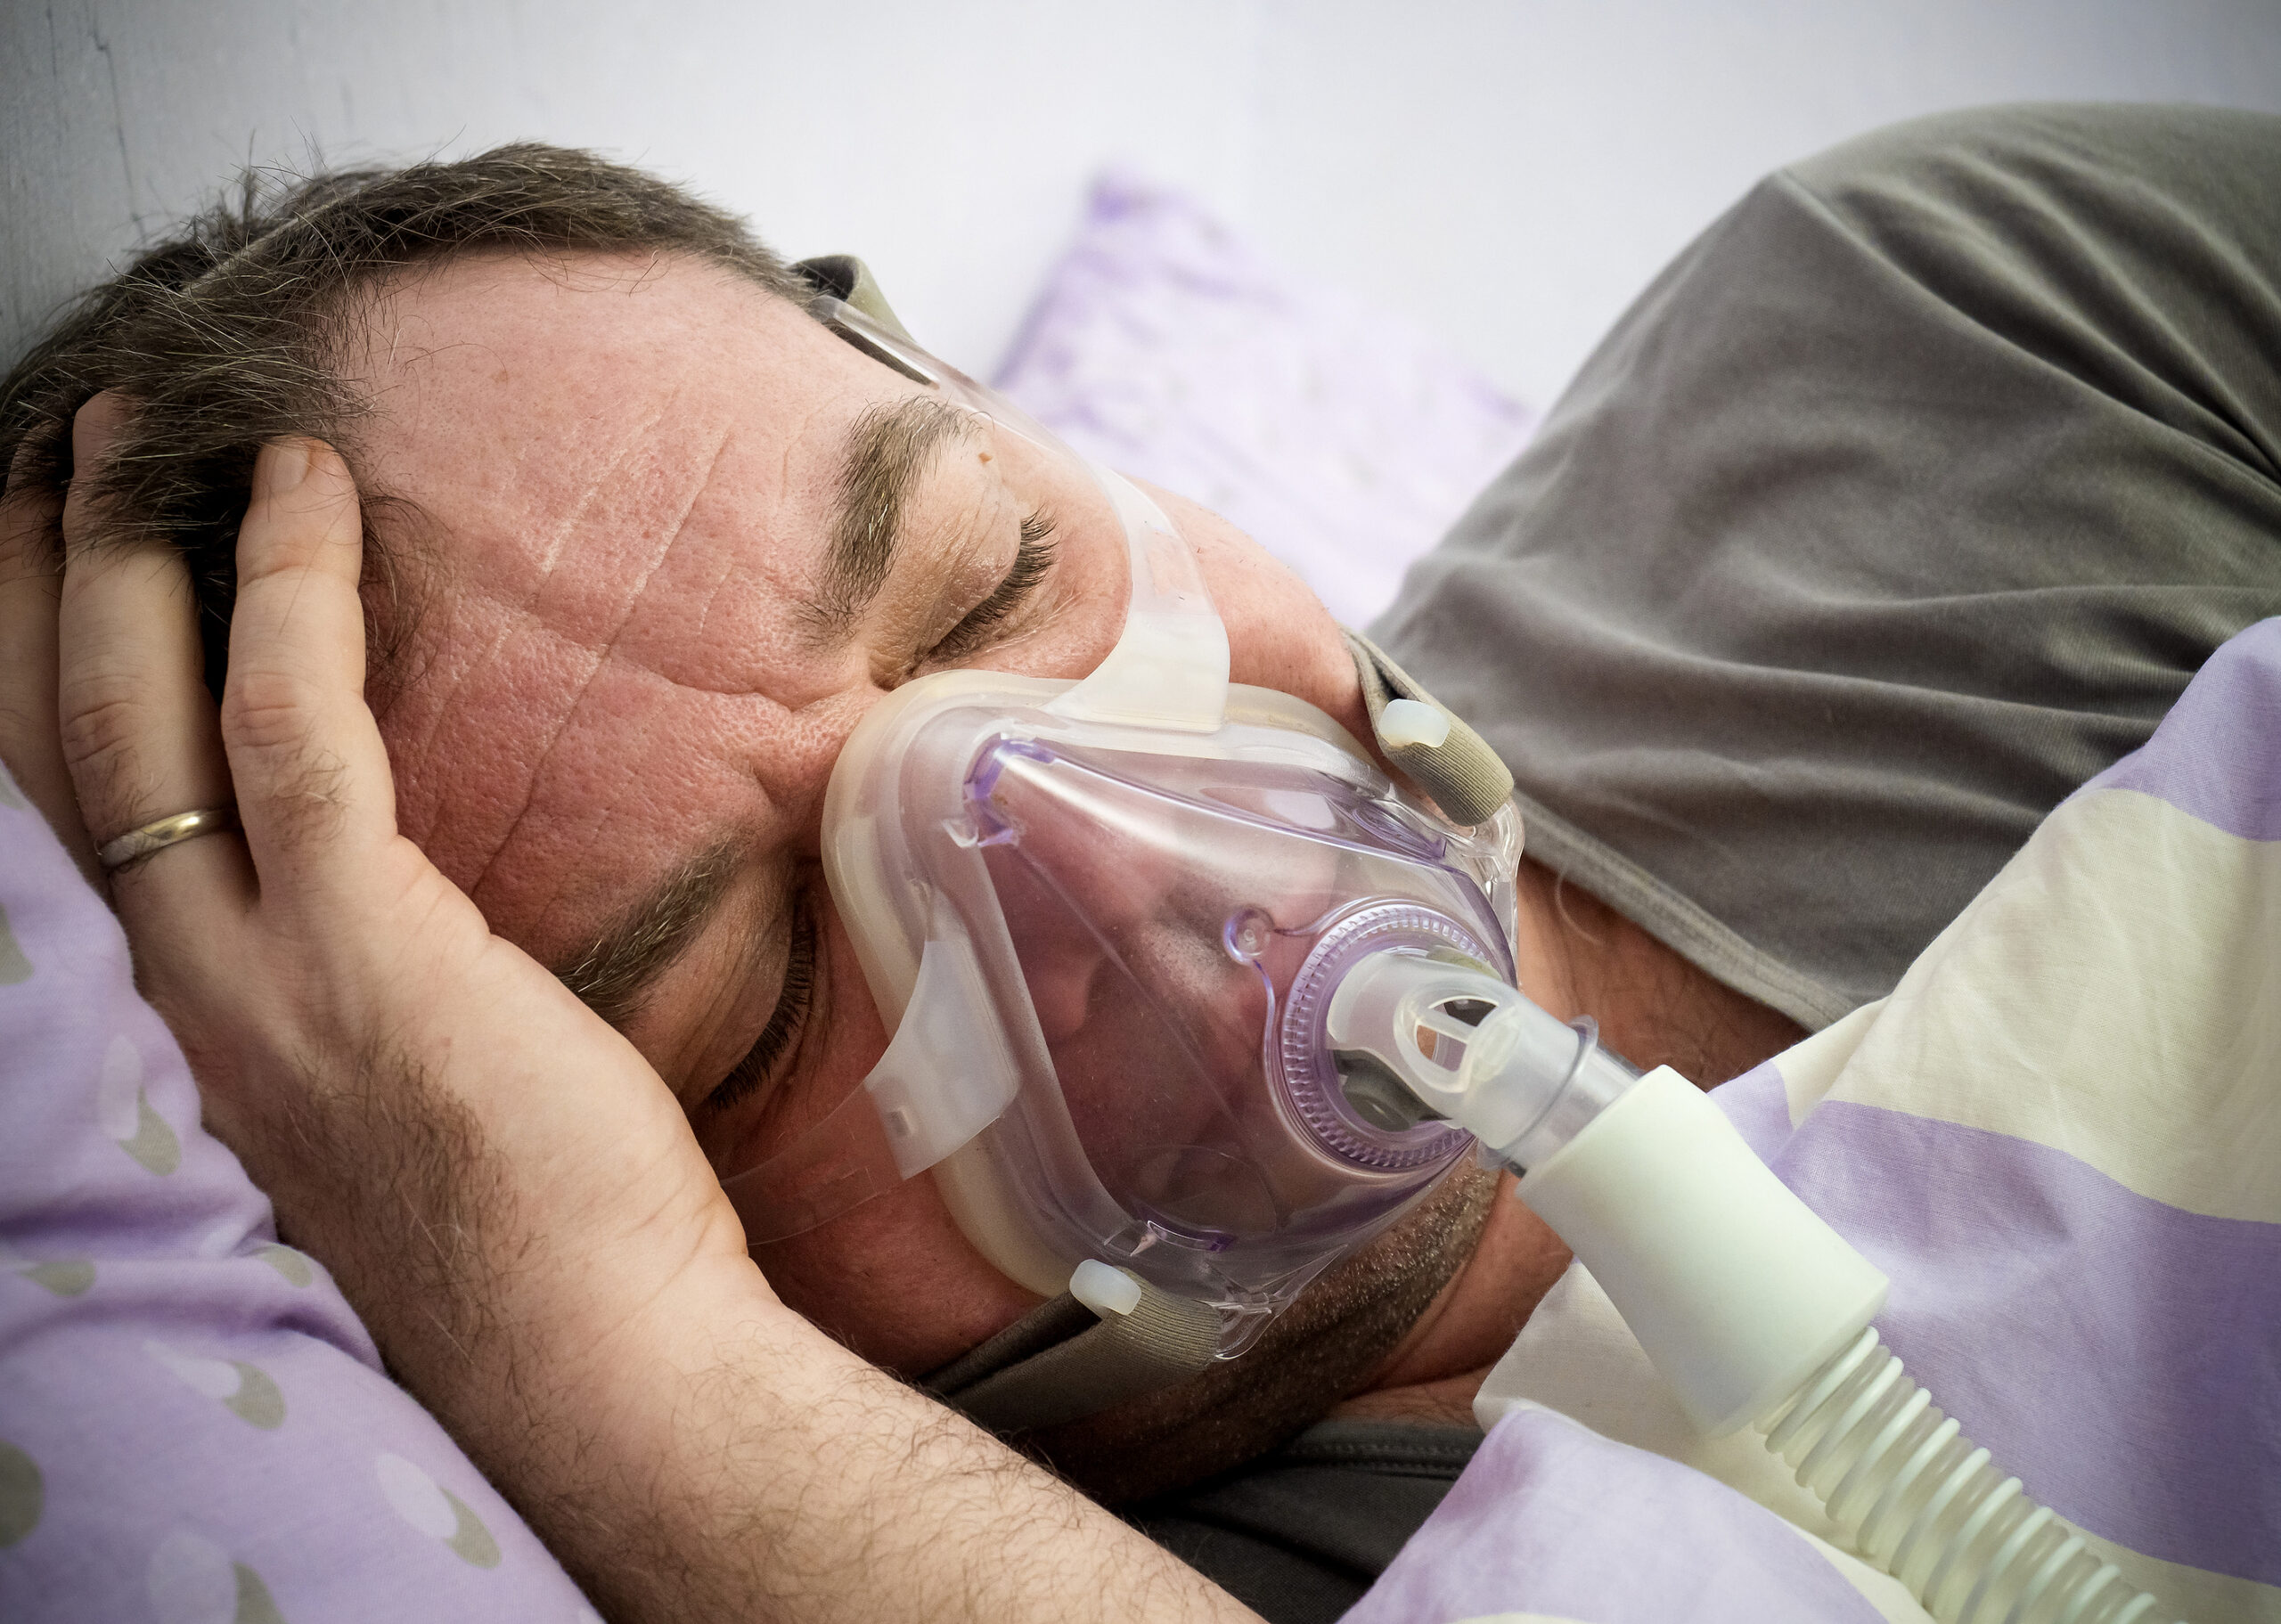 Philips Respironics Reaches Preliminary Settlement in CPAP Litigation